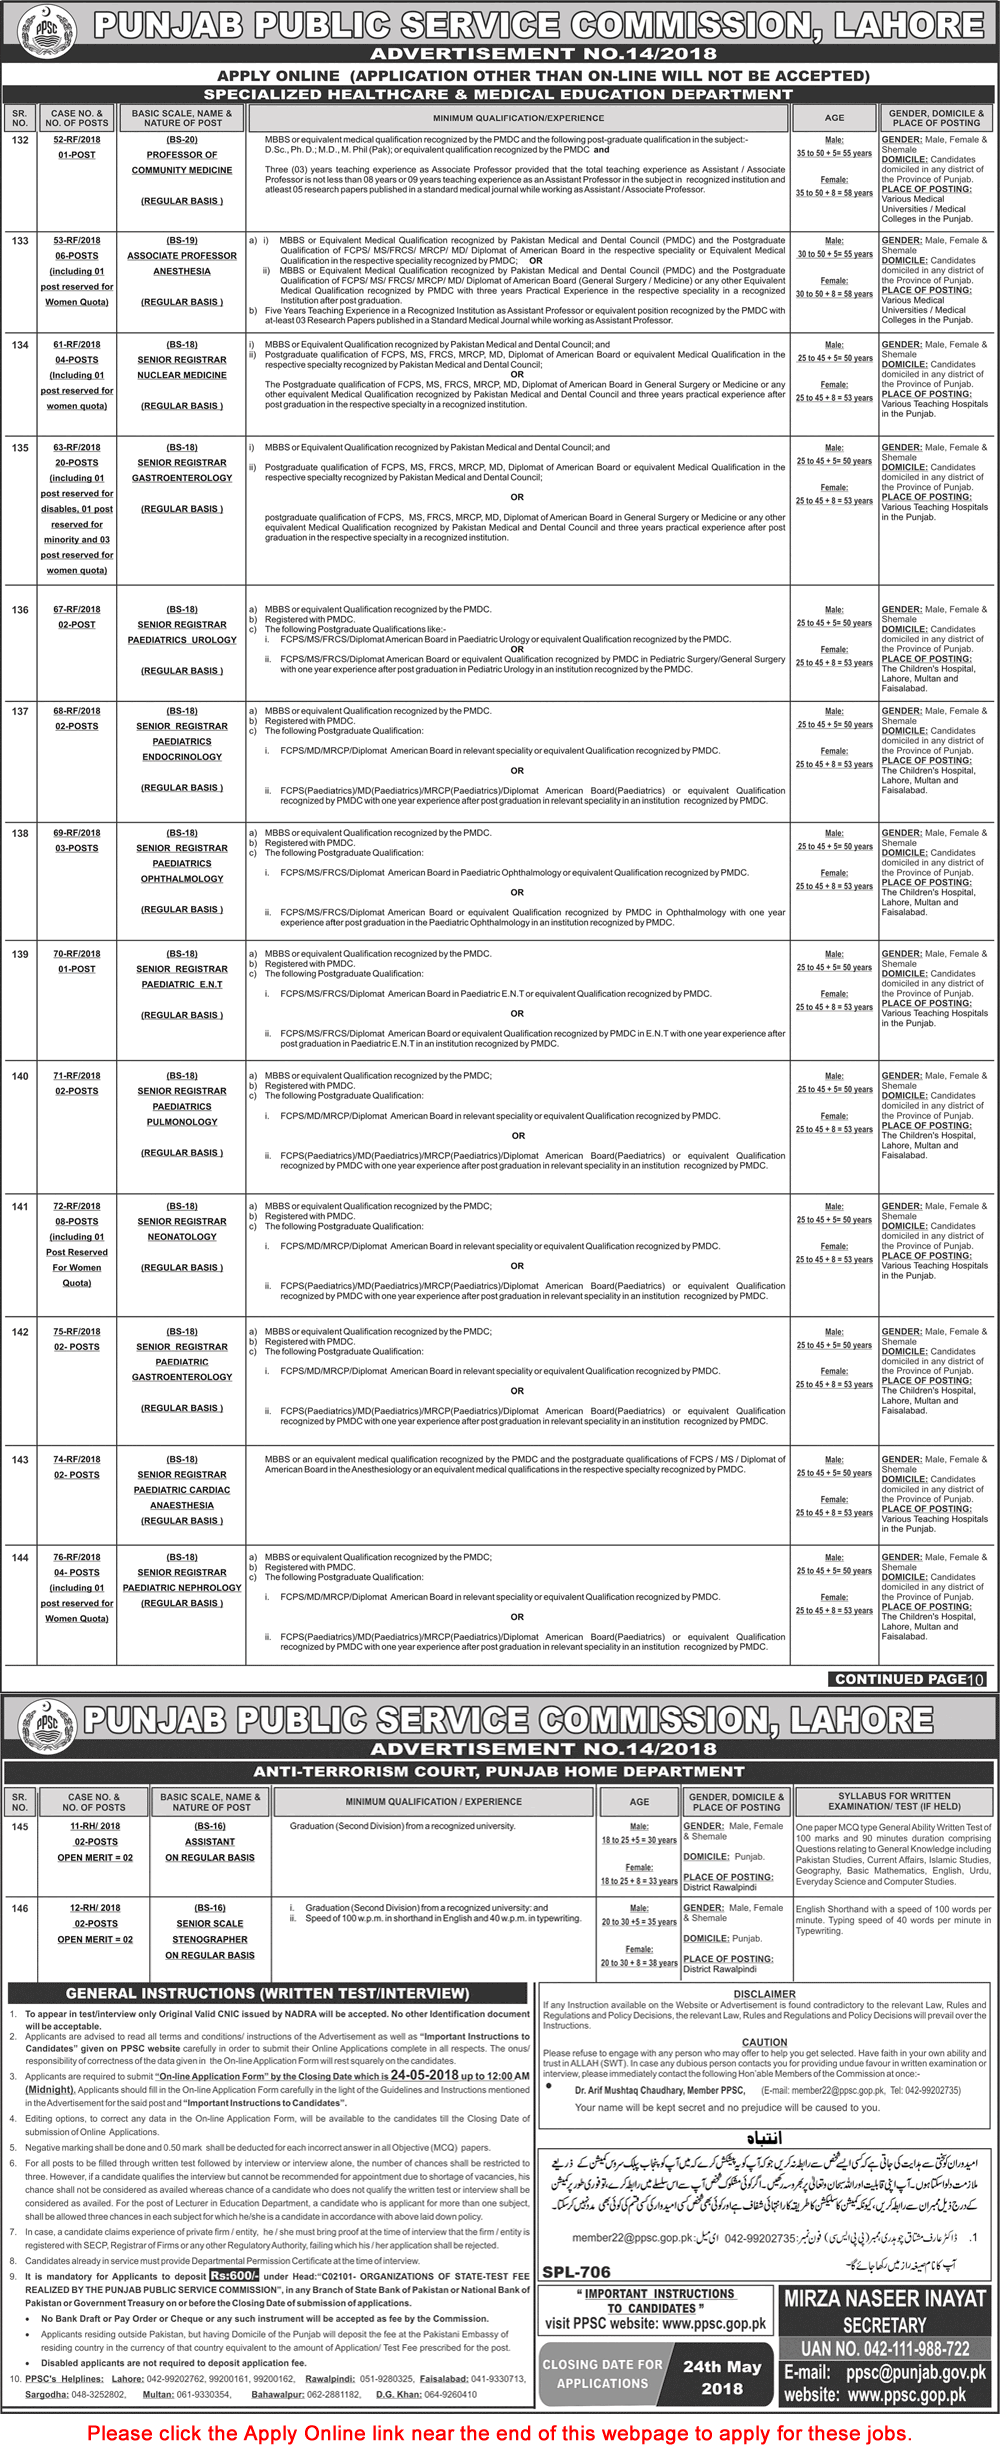 PPSC Jobs May 2018 Apply Online Consolidated Advertisement No 14/2018 Latest